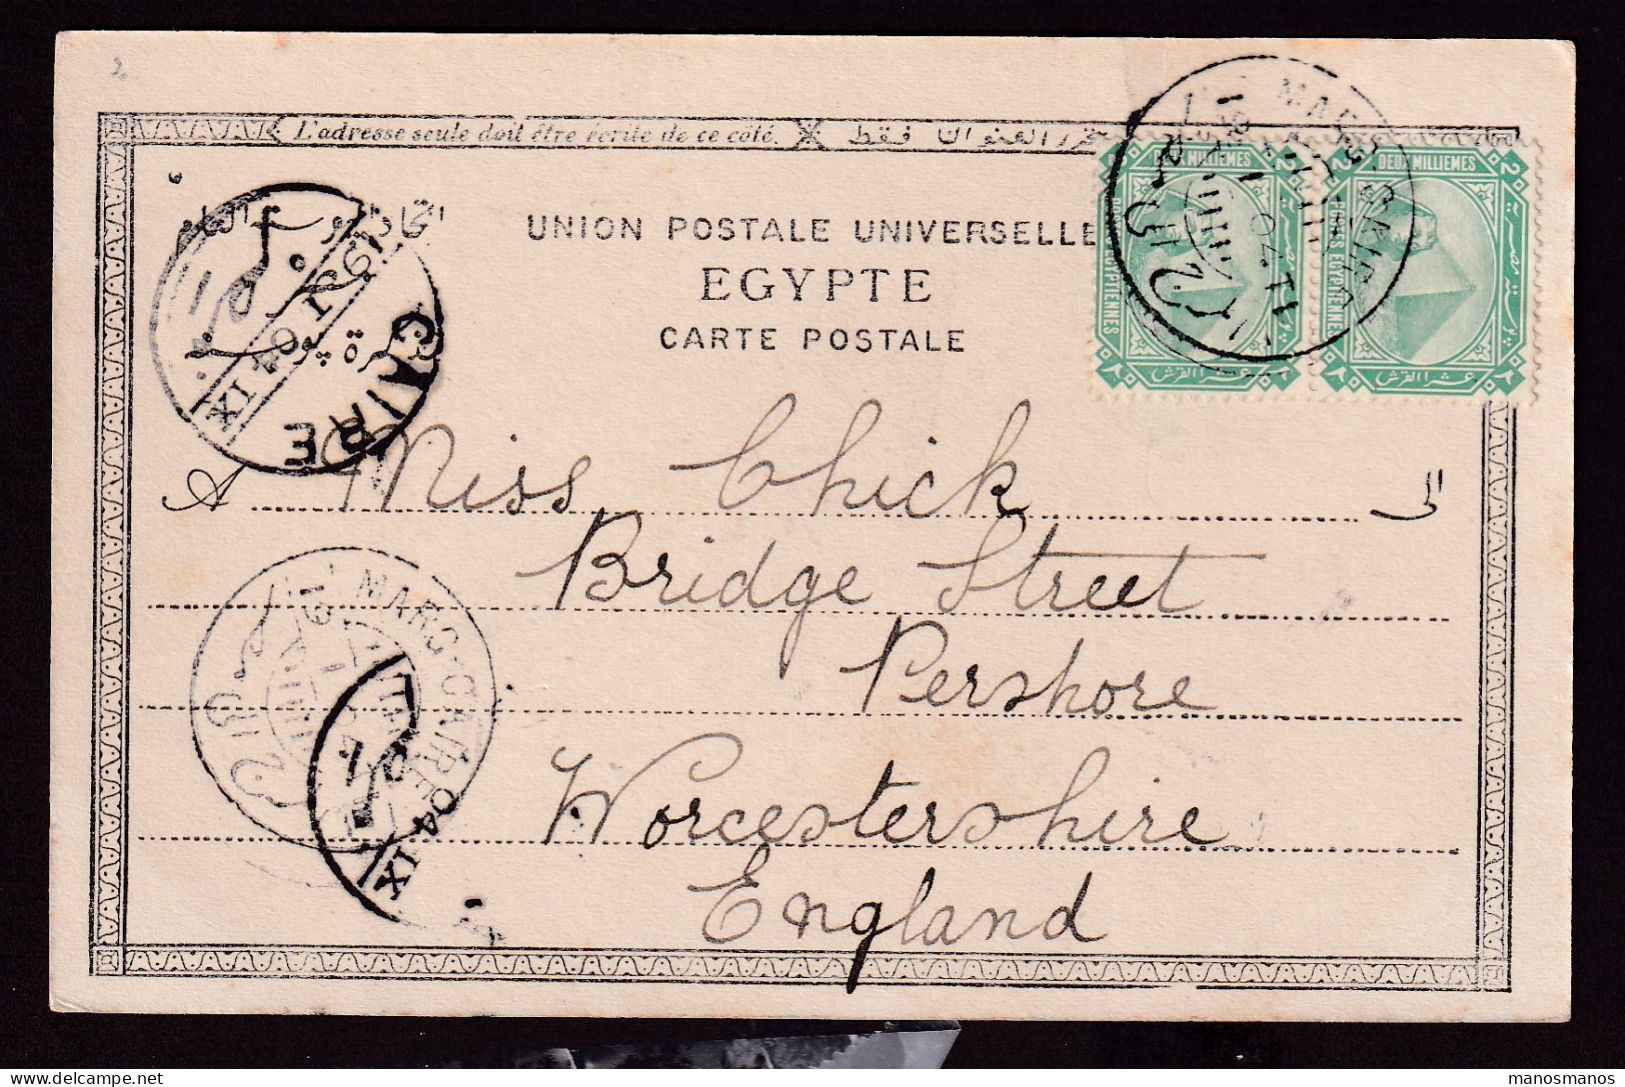 375/31 -- EGYPT MARG - CAIRE TPO - Viewcard Cancelled 1904 To England - 1866-1914 Khedivate Of Egypt